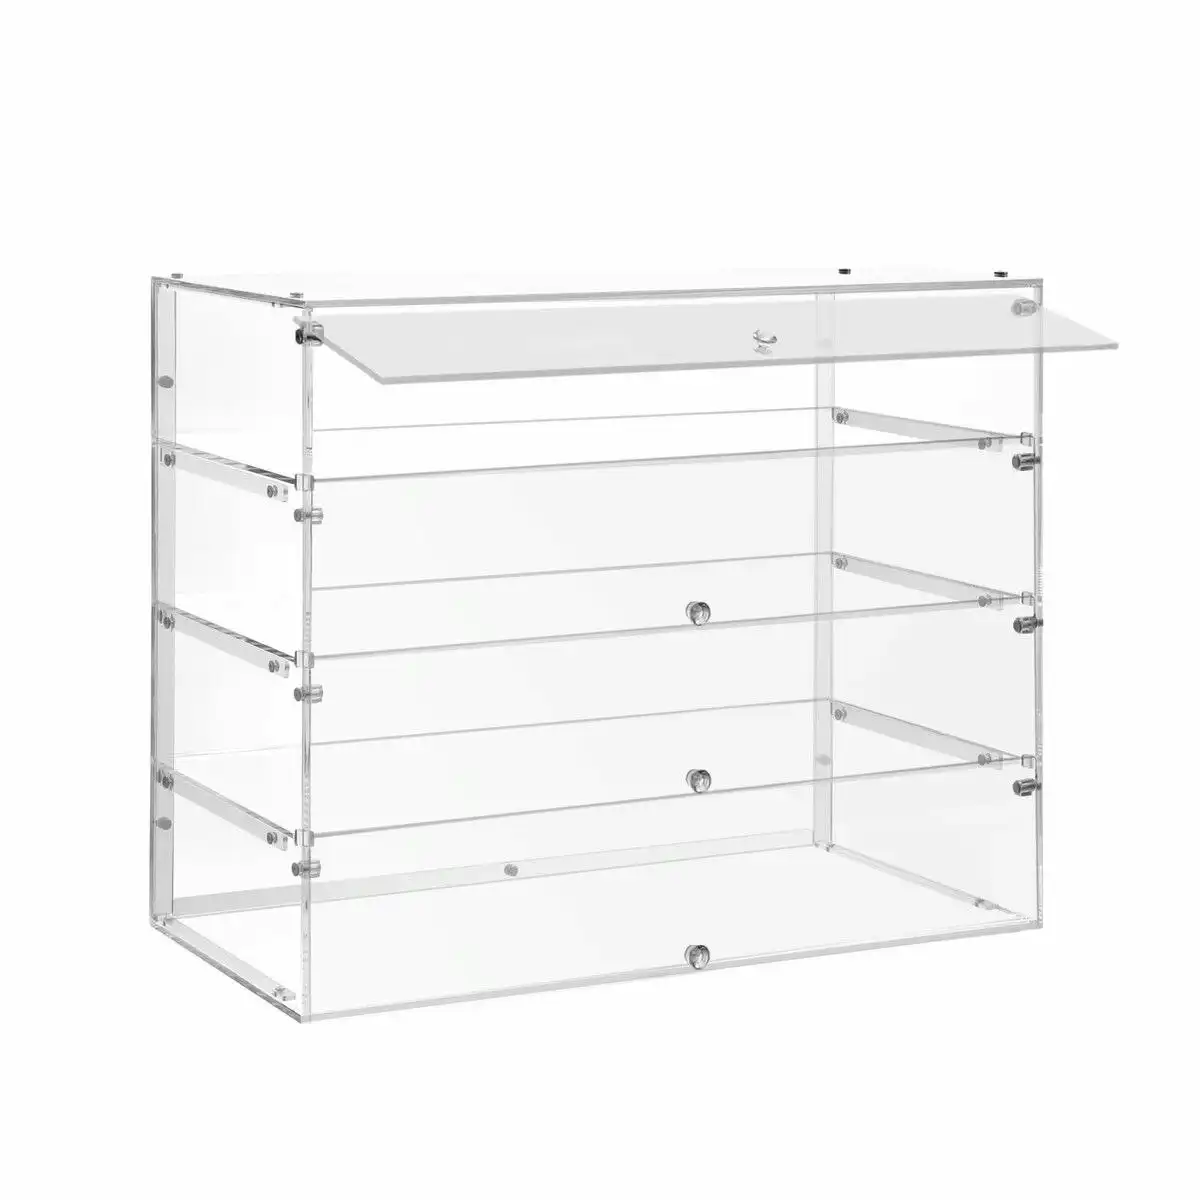 LUXSUITE Large Cake Display Cabinet 4 Tier Acrylic Stand Case Unit Holder Bakery Cupcake Muffin Donut Pastry Model Toy Showcase Desktop 5mm Transparent